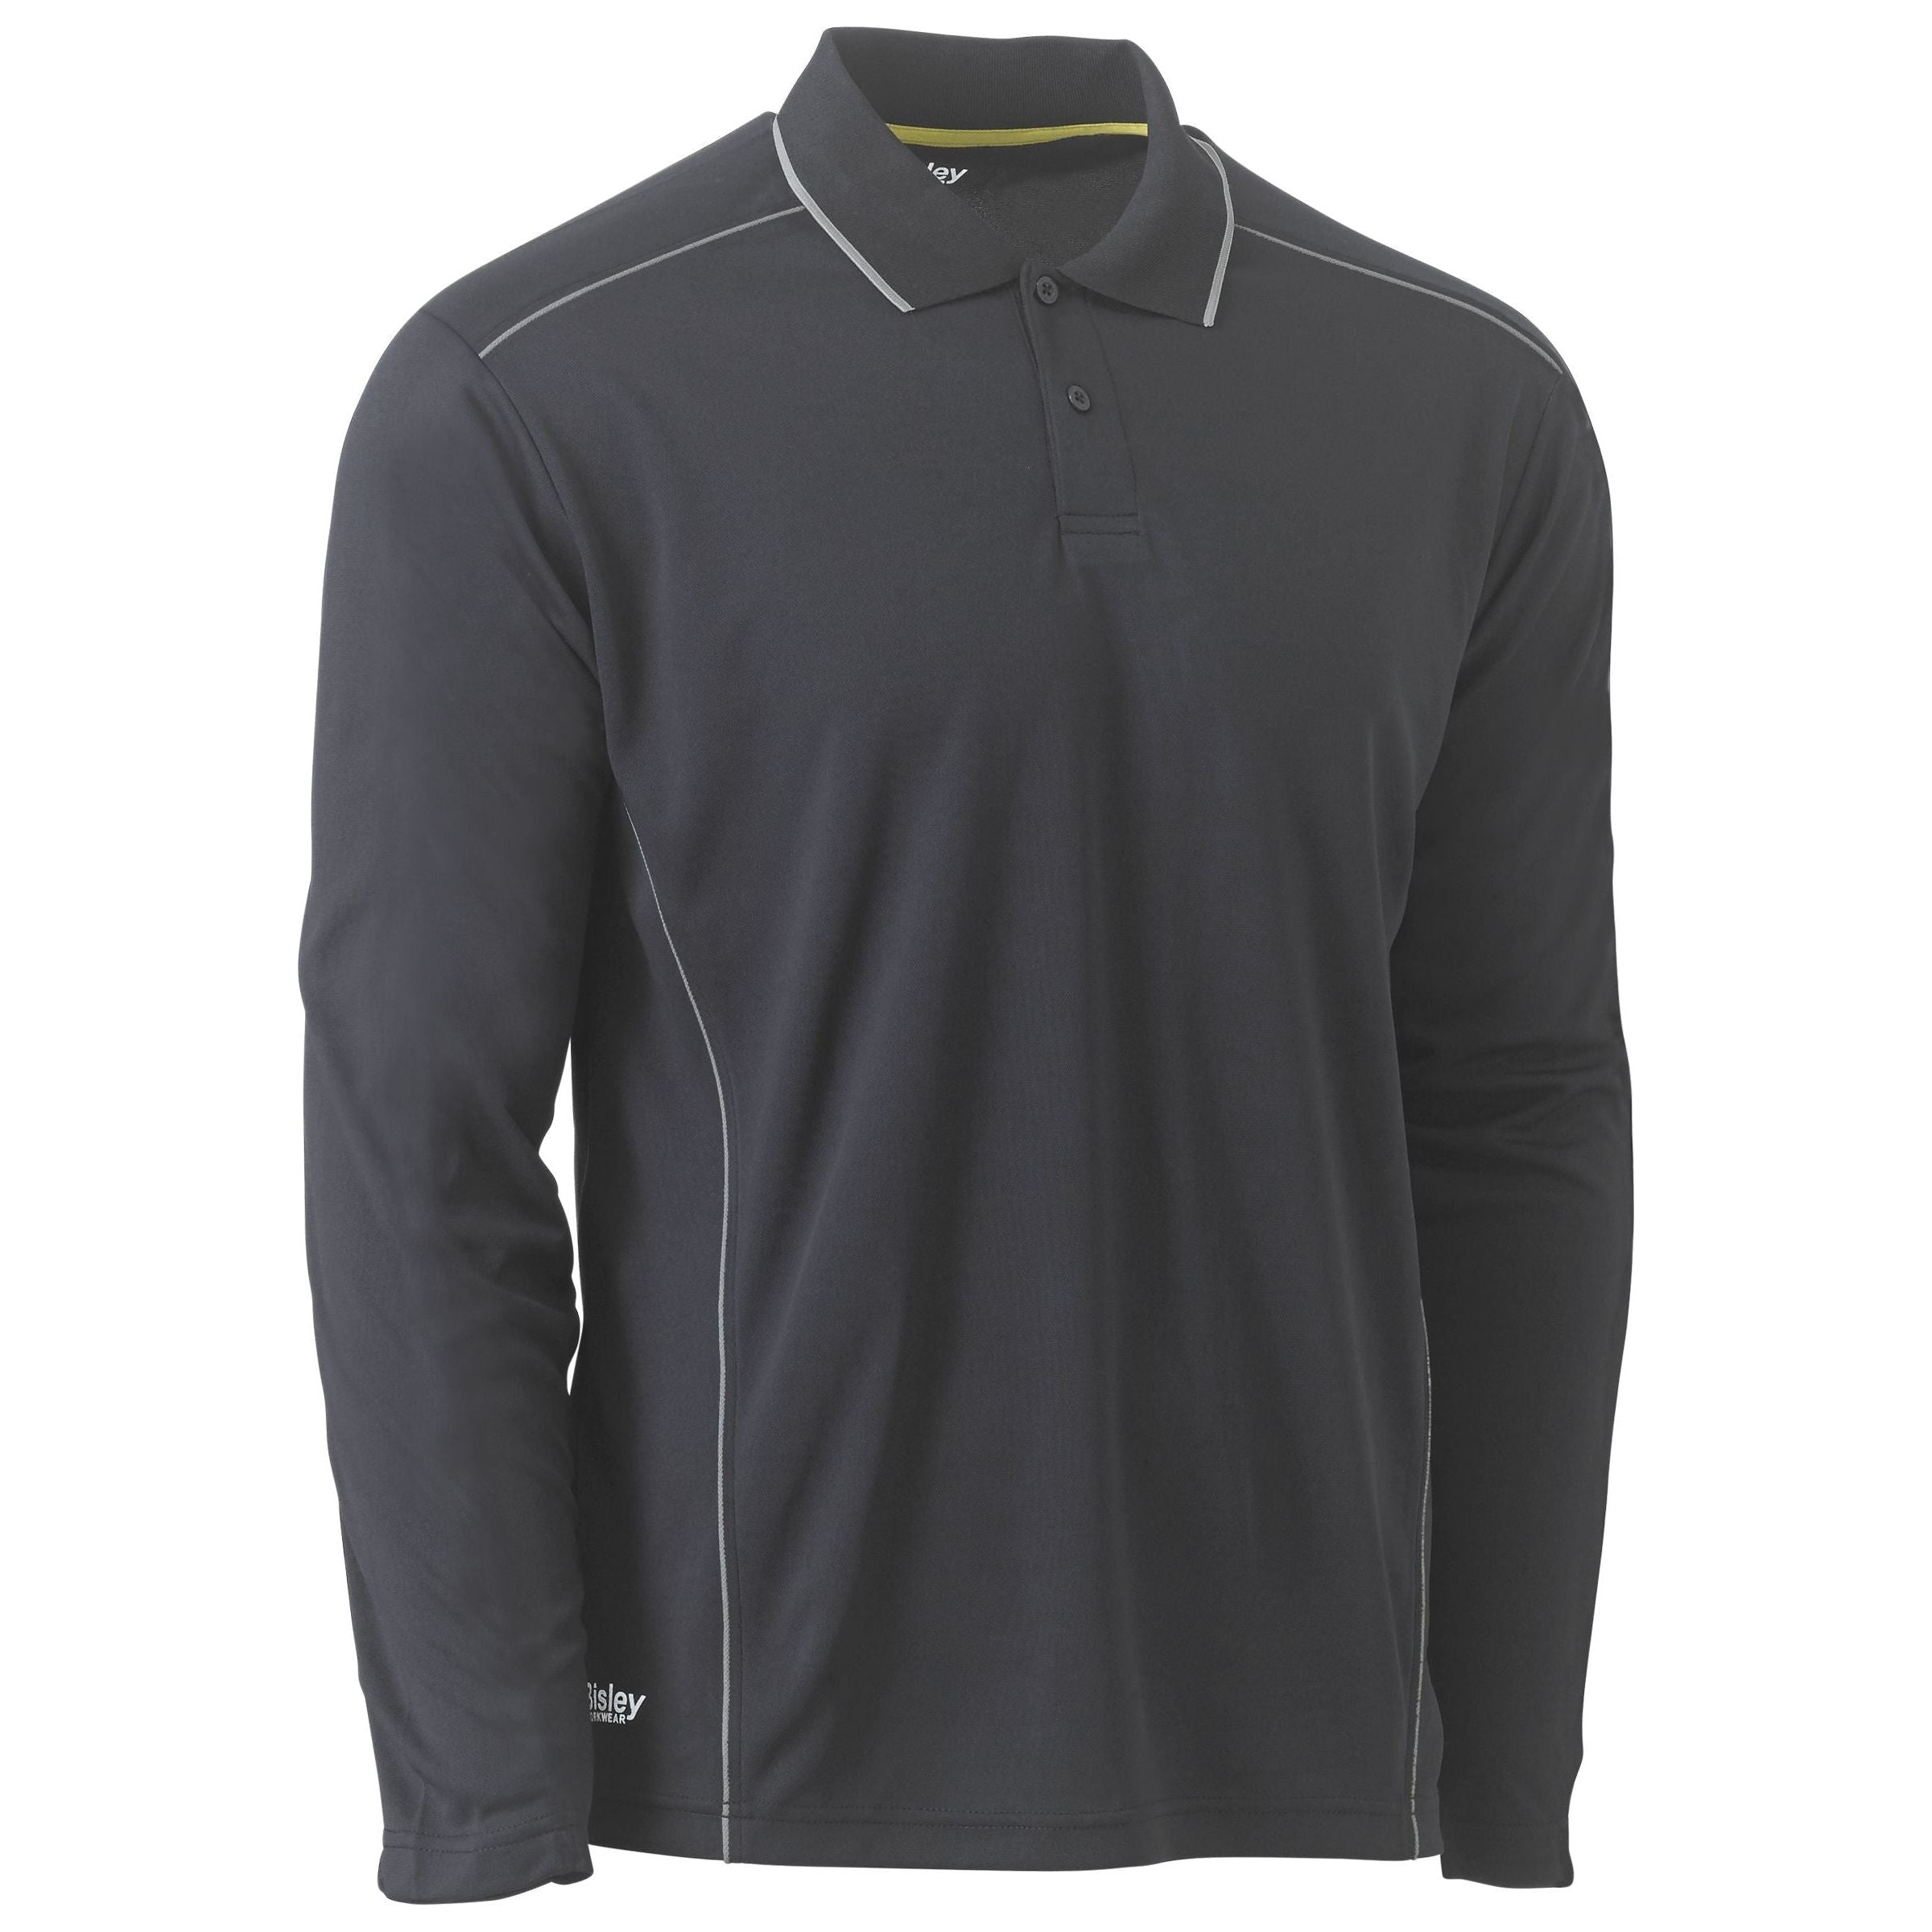 Cool Mesh Polo with Reflective Piping - BK6425